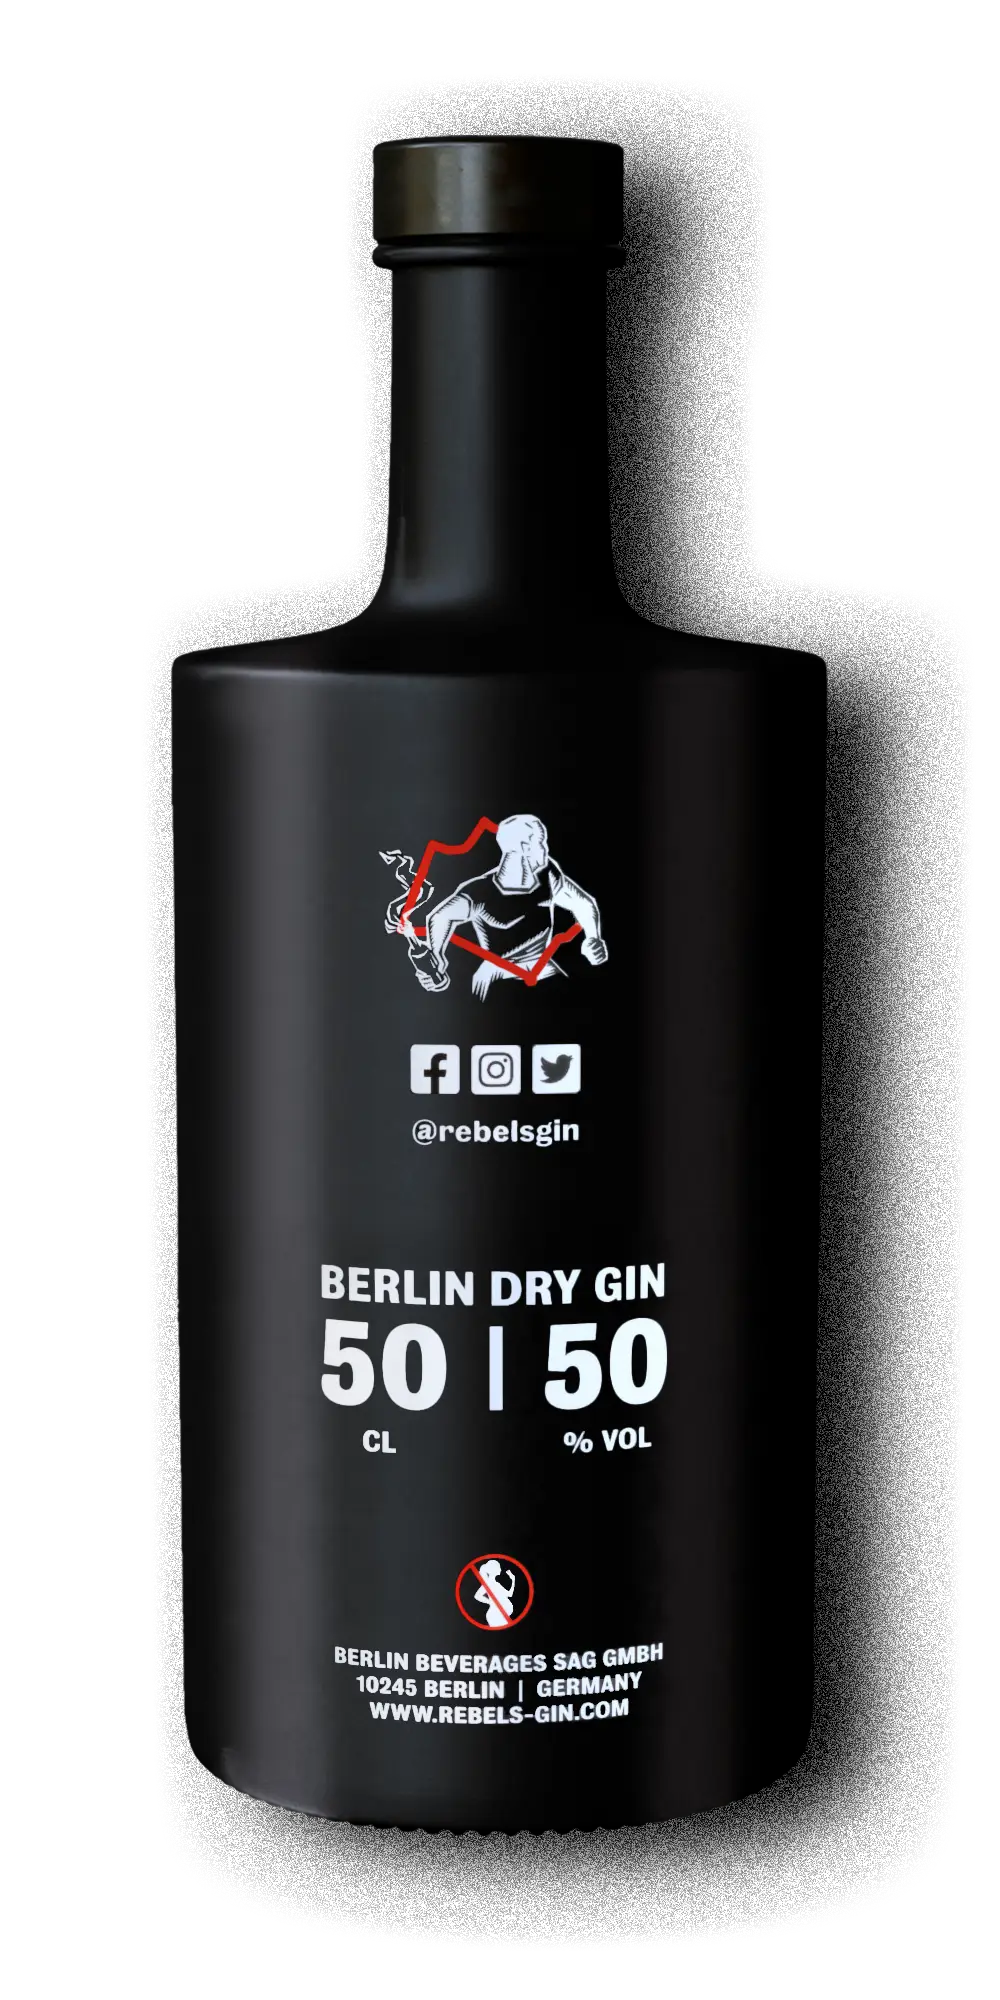 Photo of the FREEDOM REBELS GIN bottle (back)